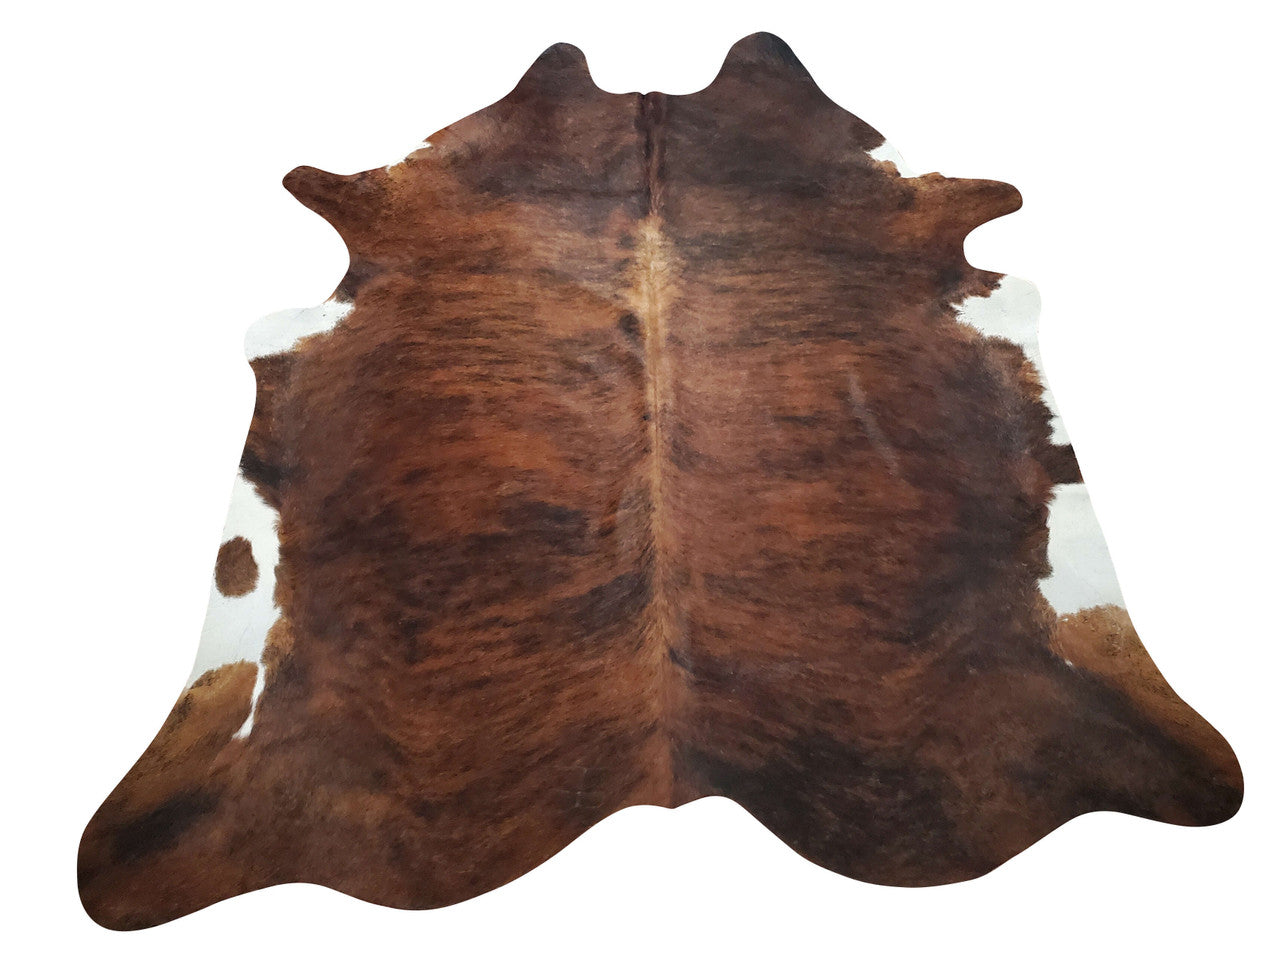 If you want to impress your guests, these brindle brown cowhide rug looks so expensive, hand finished with highest quality material, looks amazing in any space. 